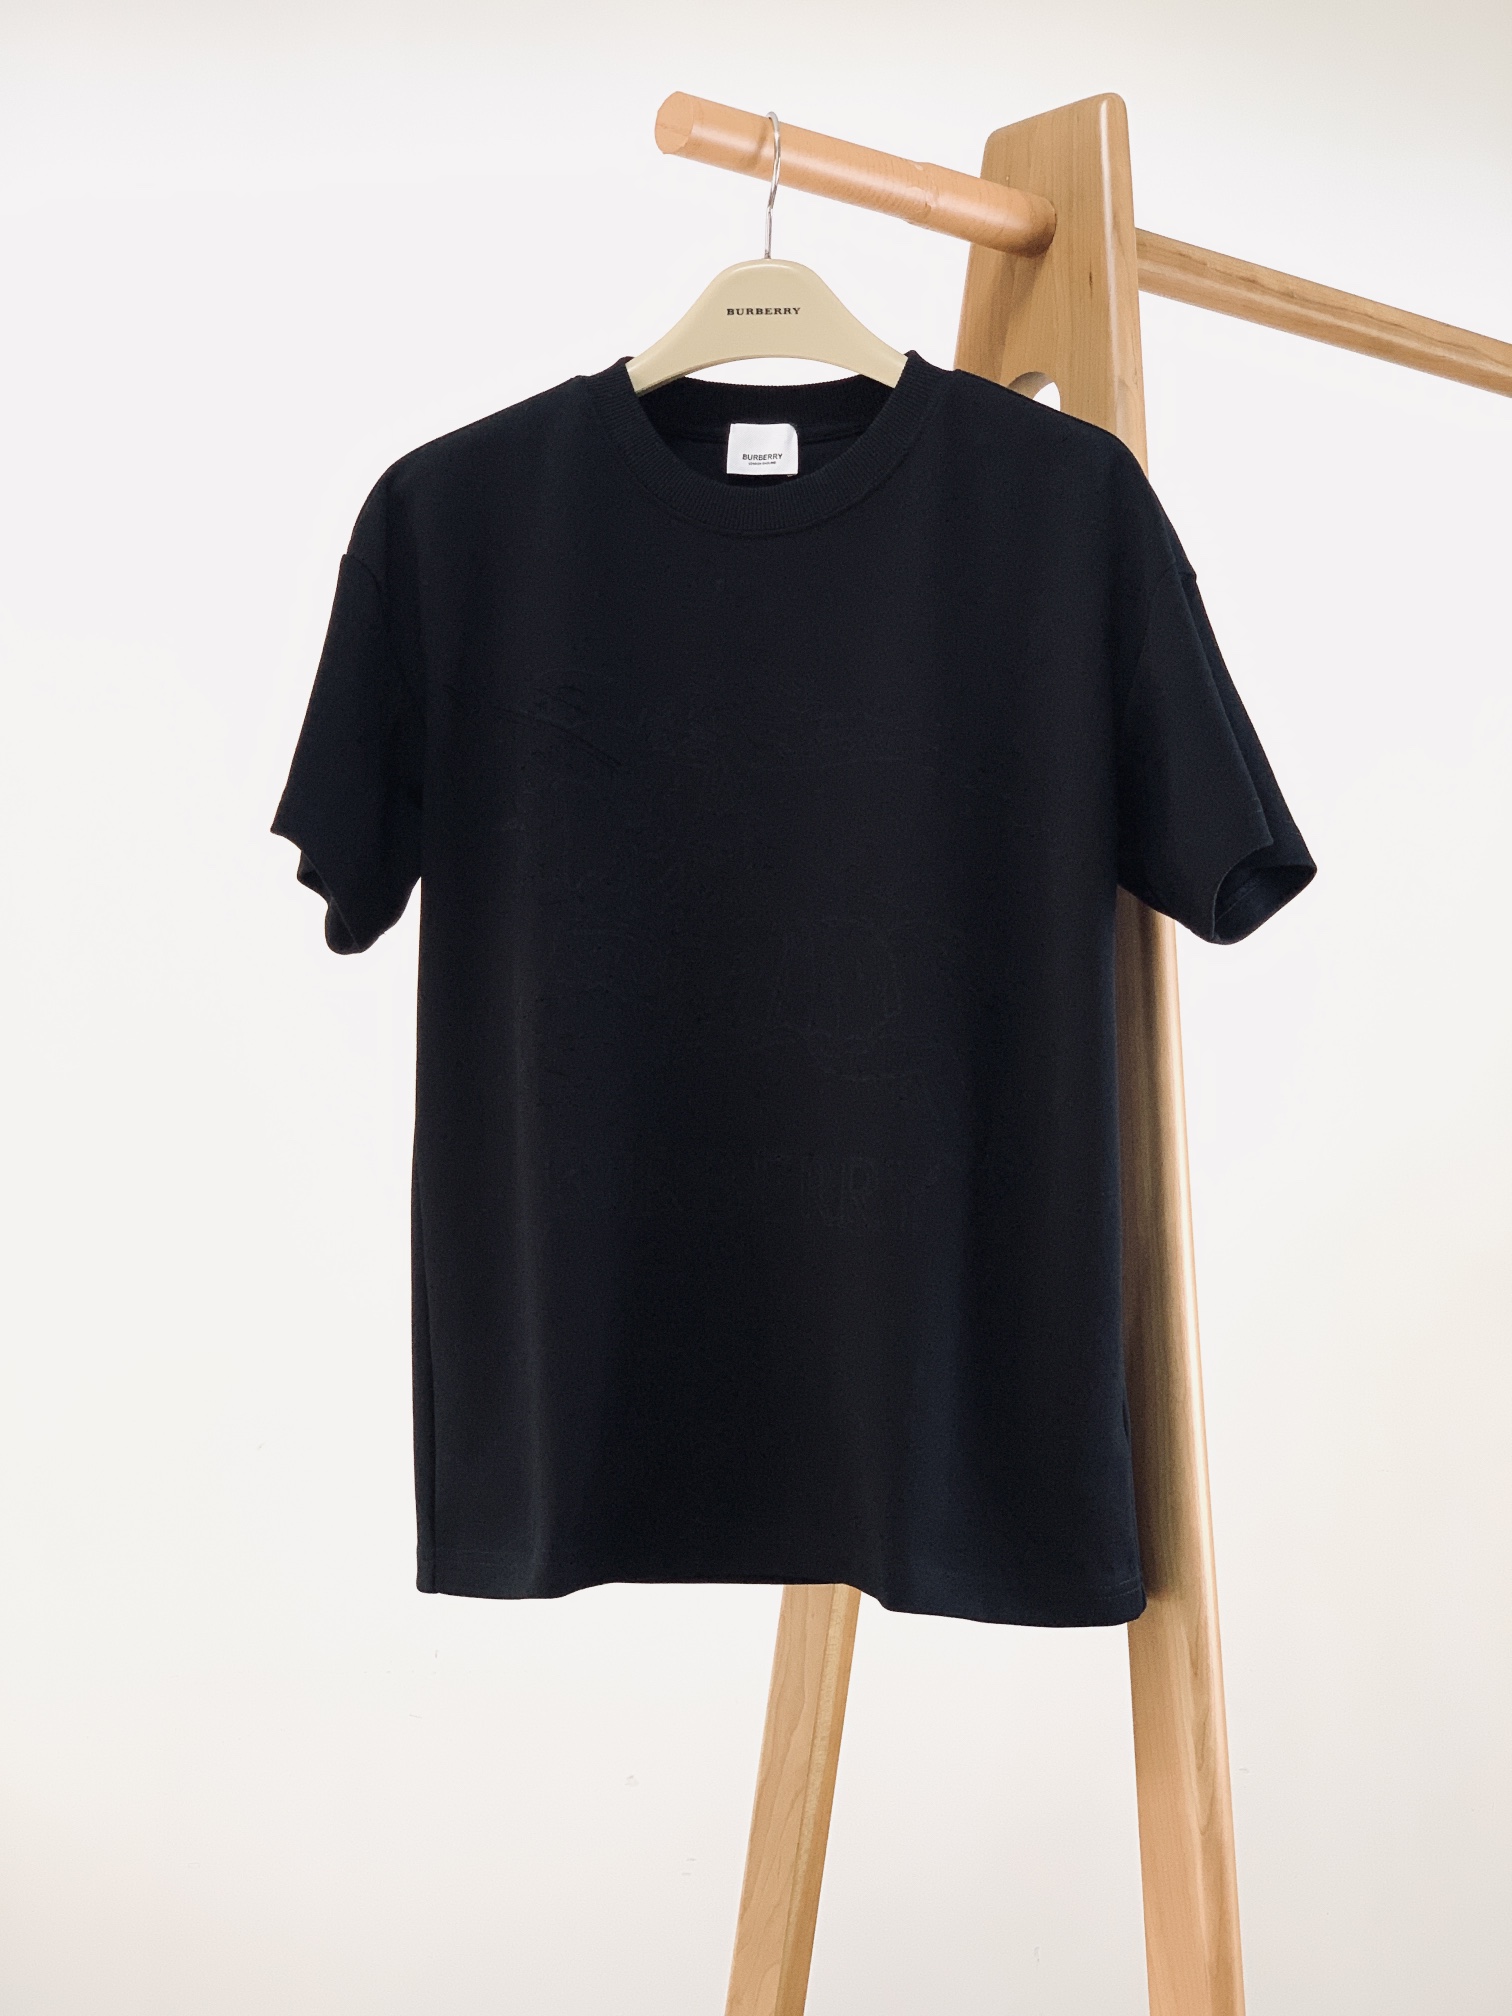 Burberry Clothing T-Shirt Replicas Buy Special
 Unisex Cotton Spring/Summer Collection Fashion Casual